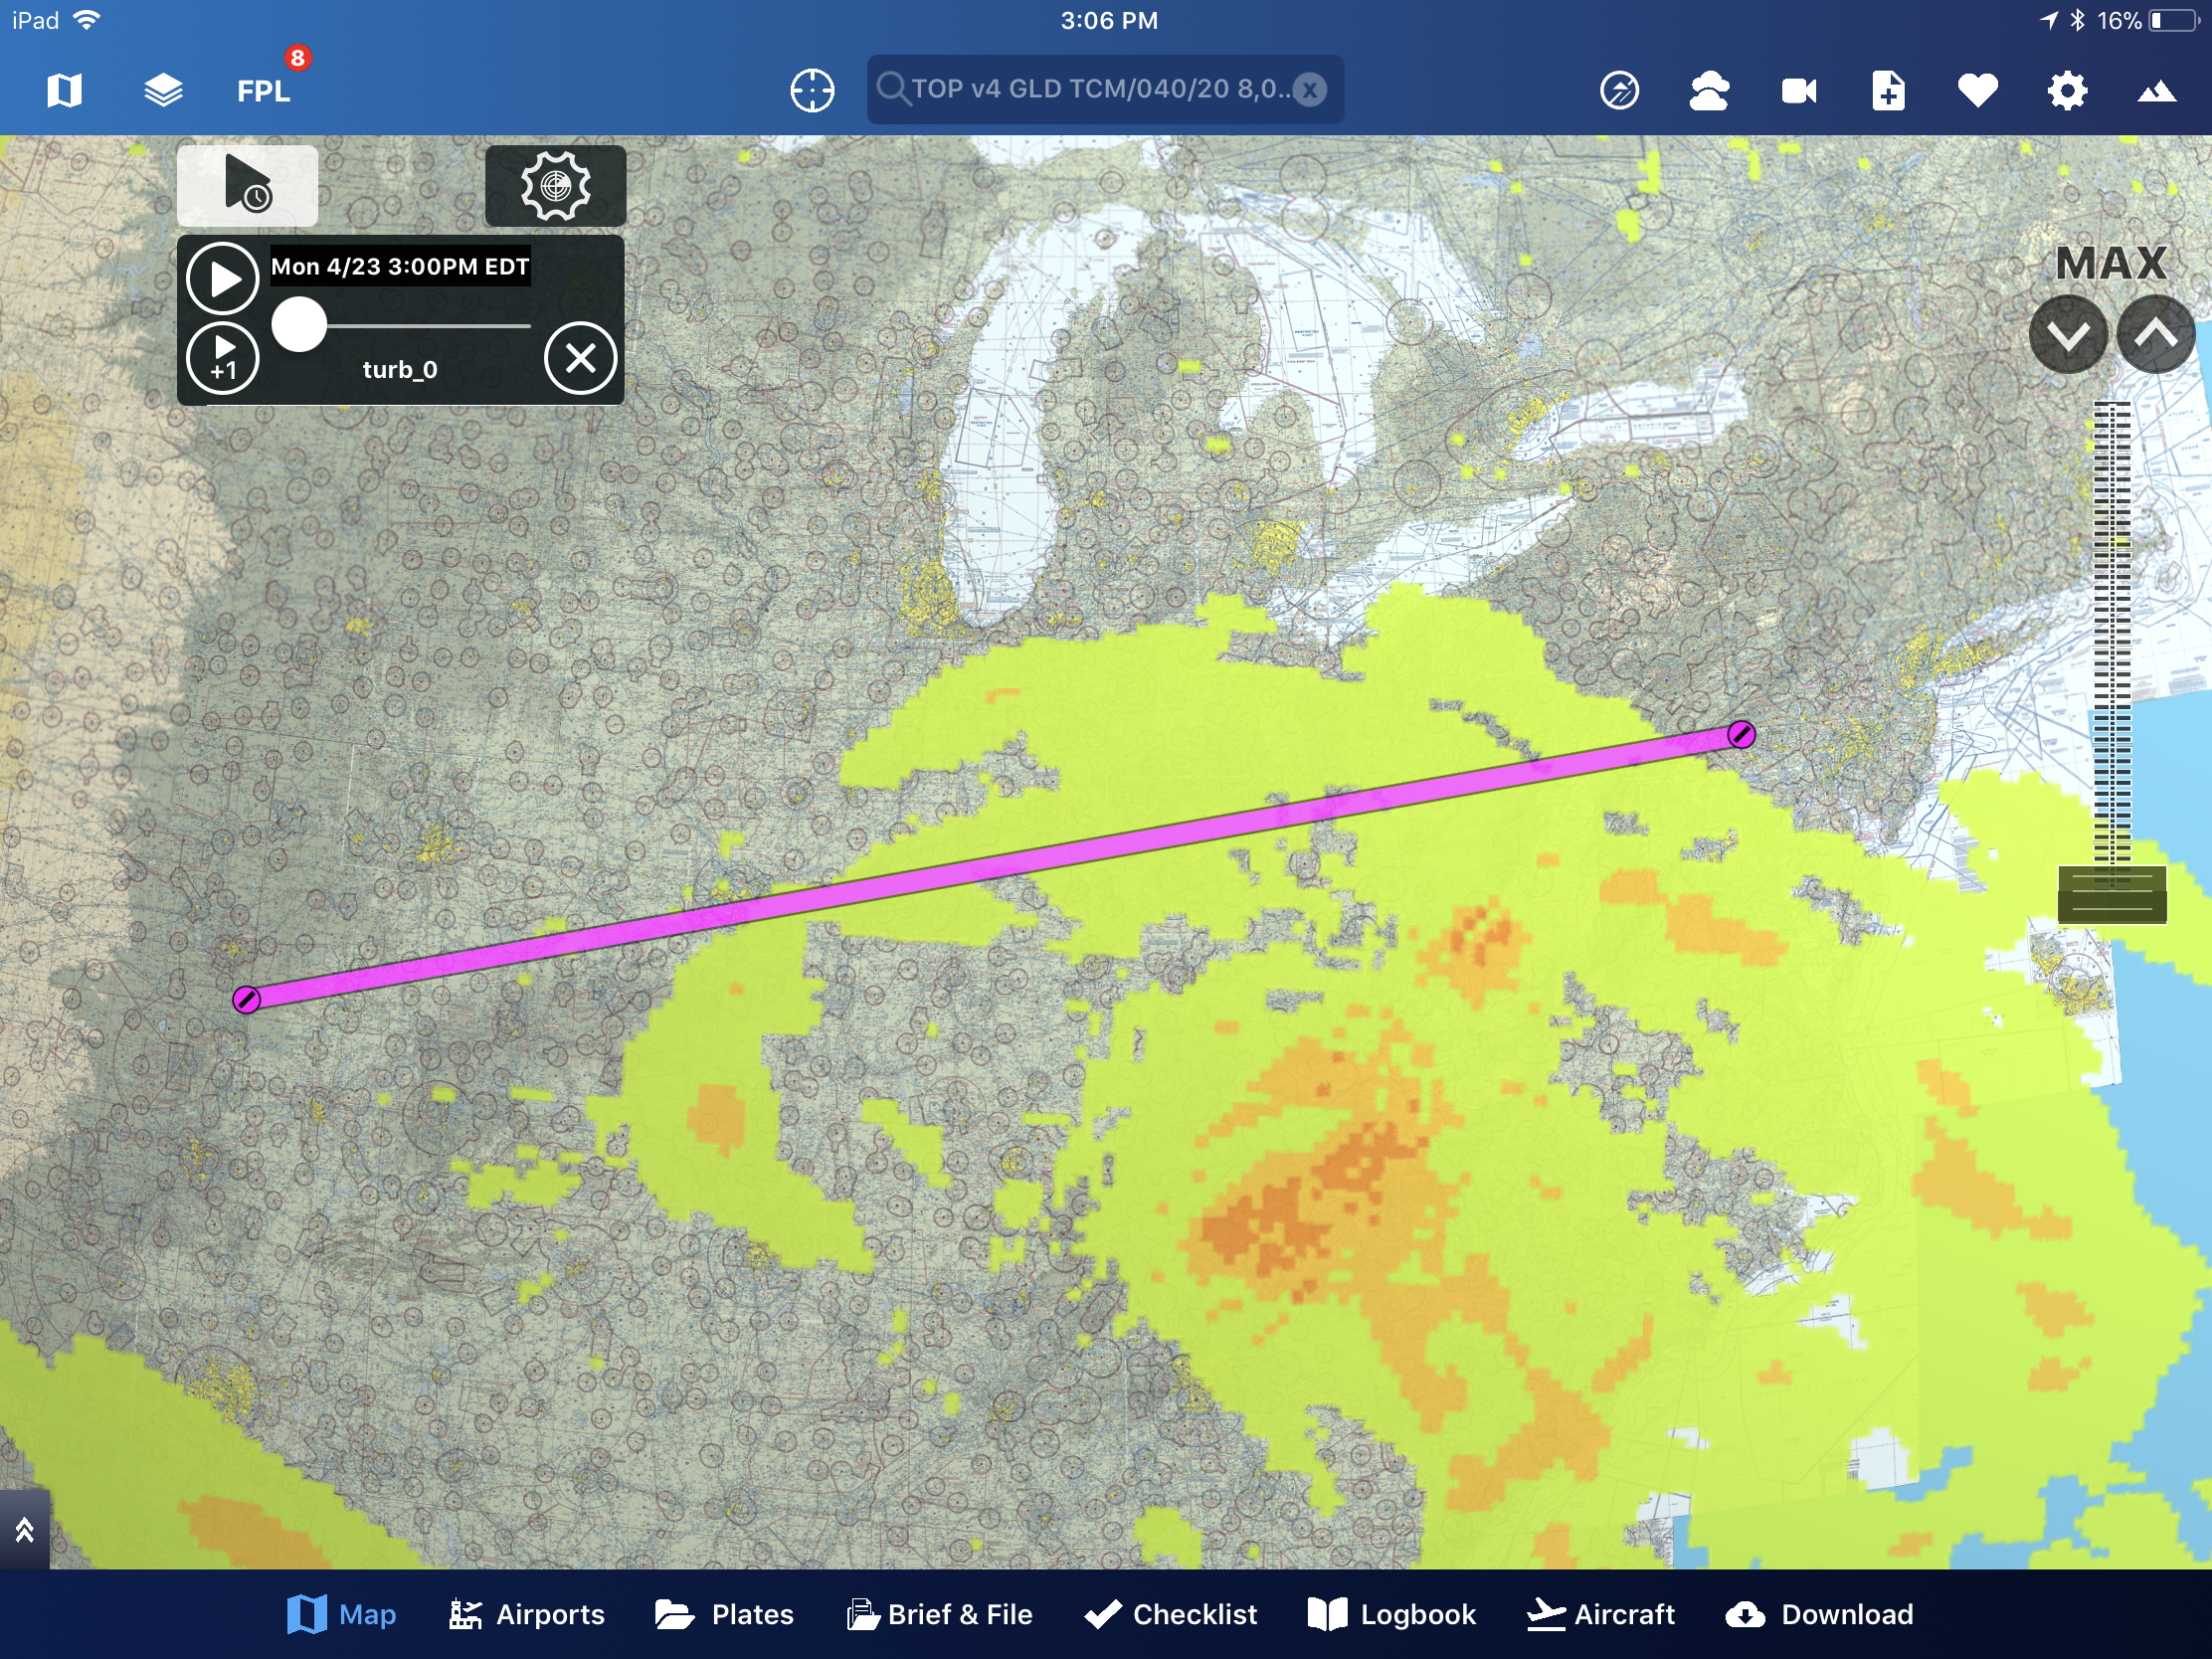 Check out these four big aviation app updates - iPad Pilot News